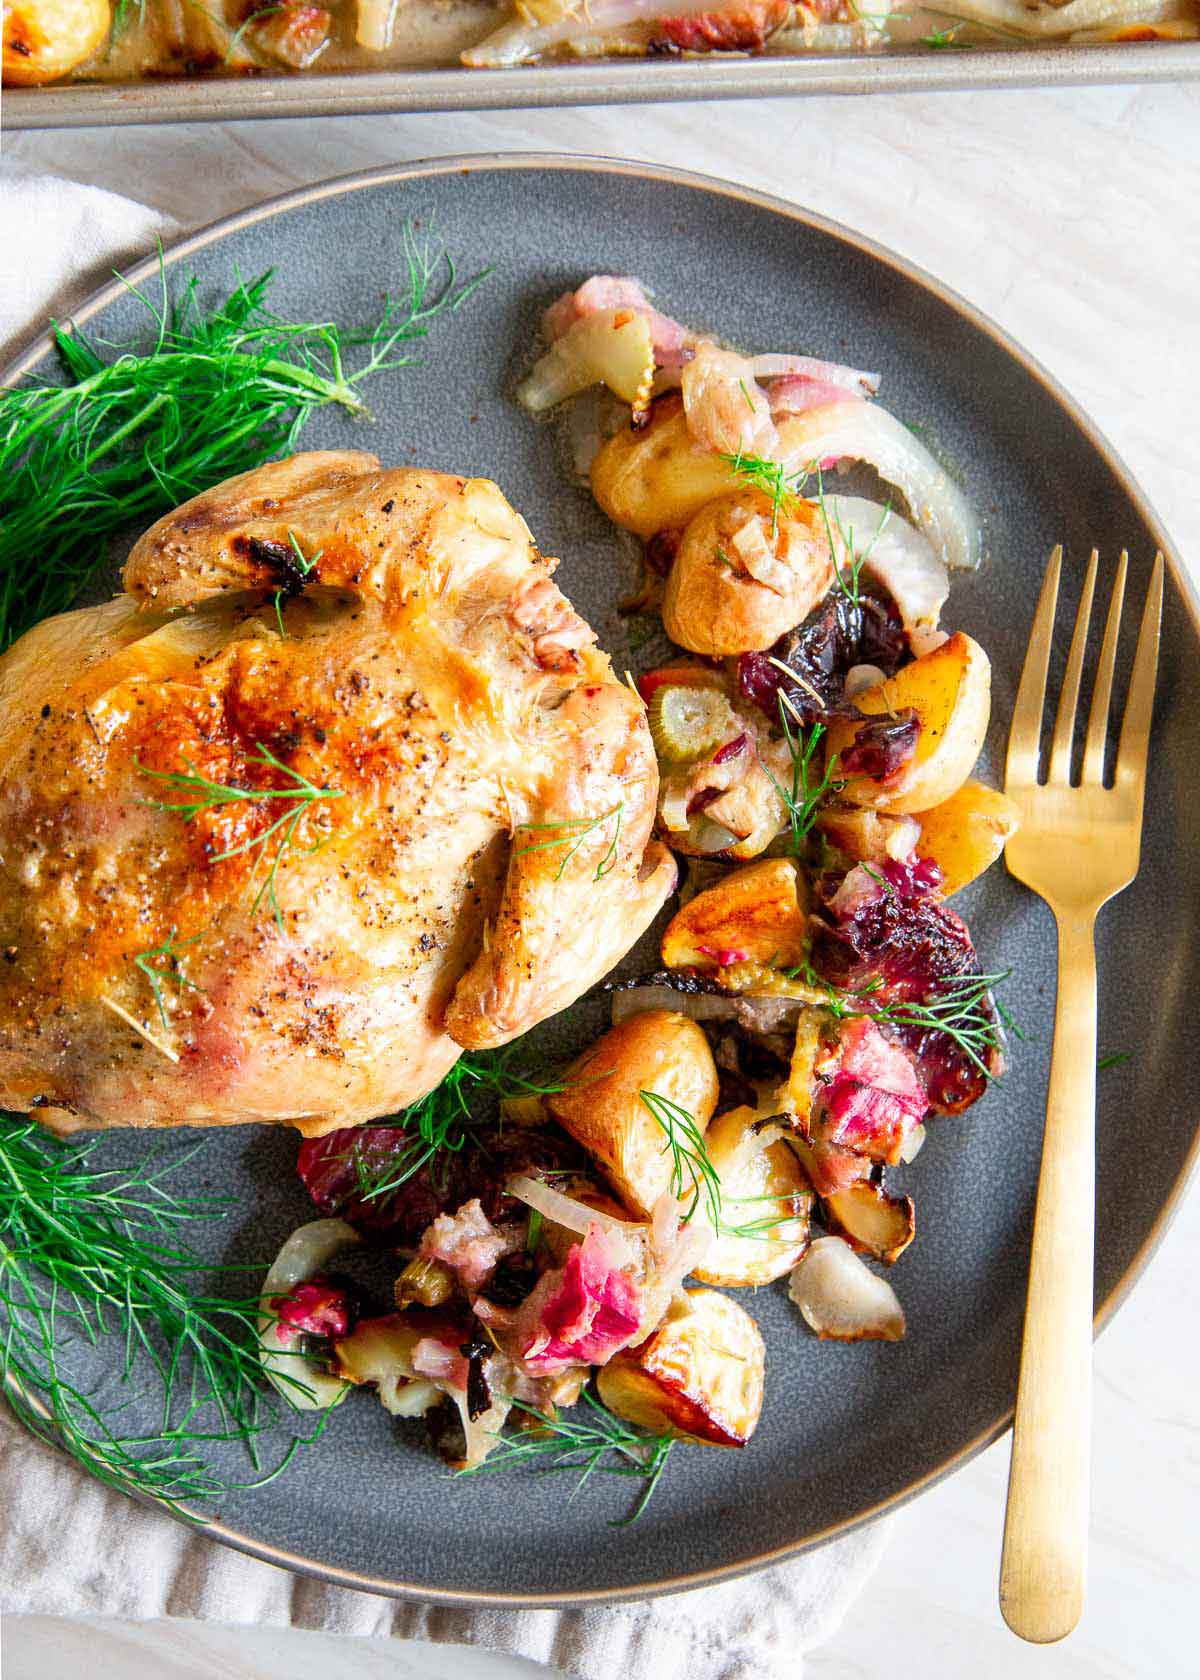 Cornish Game Hens are the perfect dinner option for a special meal when you want an impressive meal that's easy to throw together.